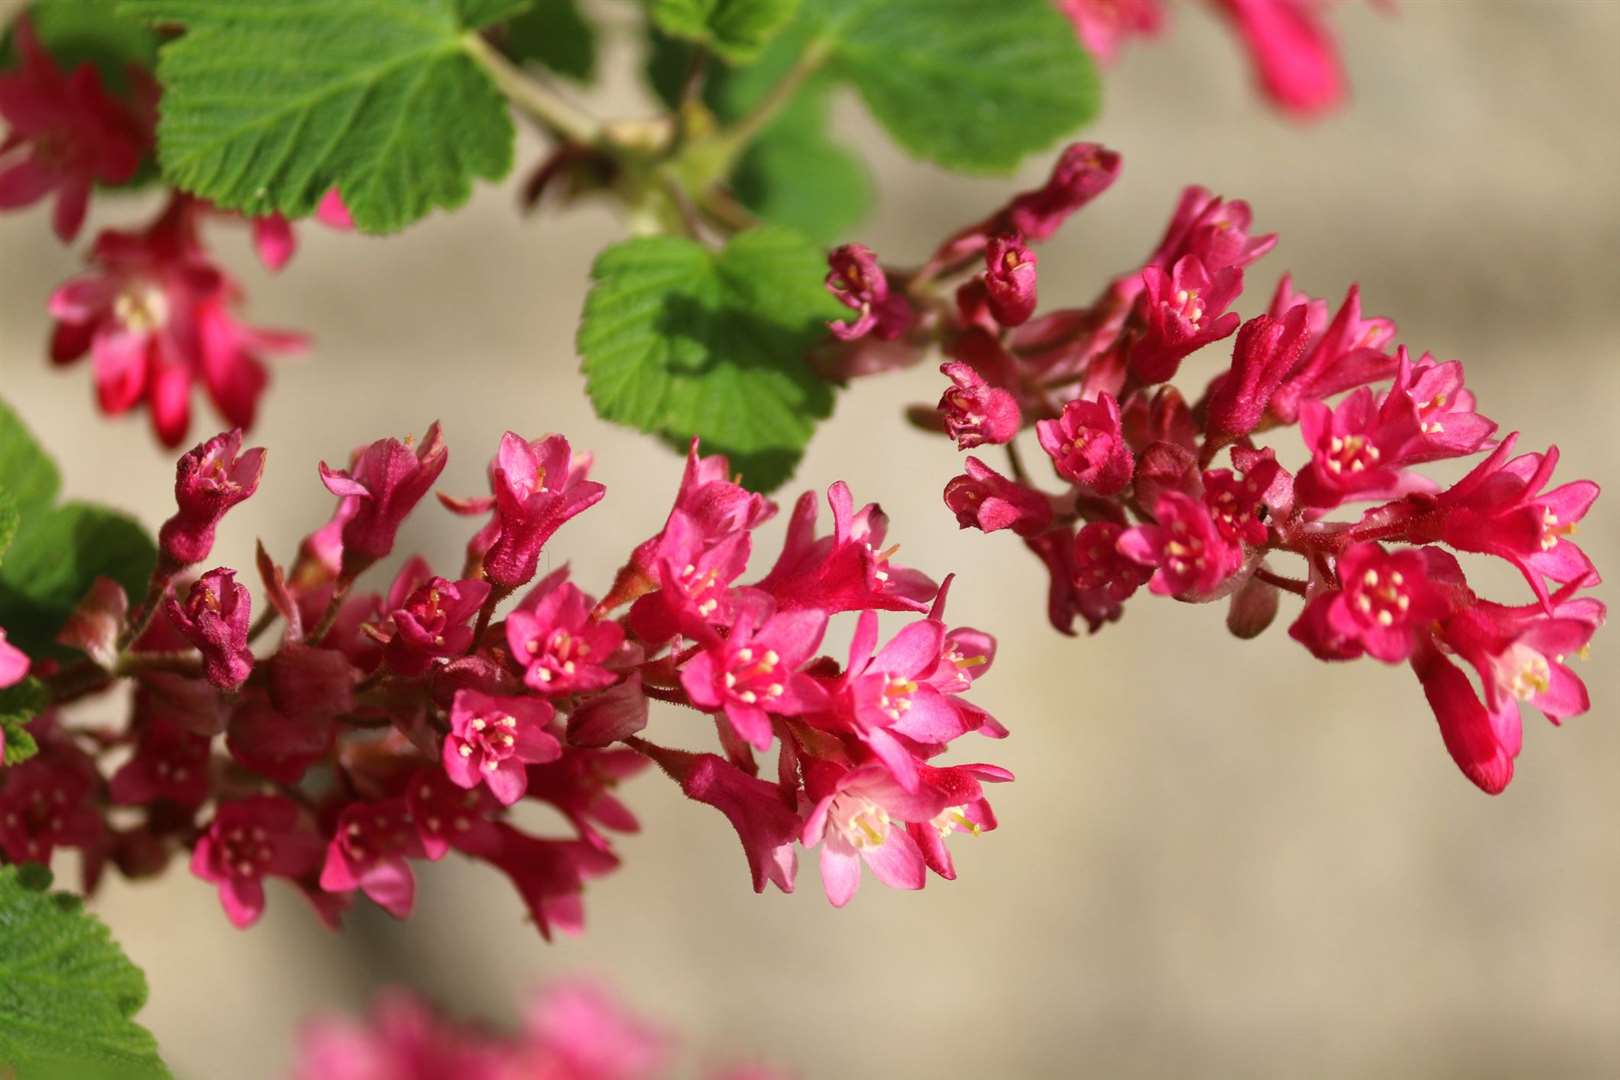 Red currant flowers. Photo credit: iStock/mtreasure.